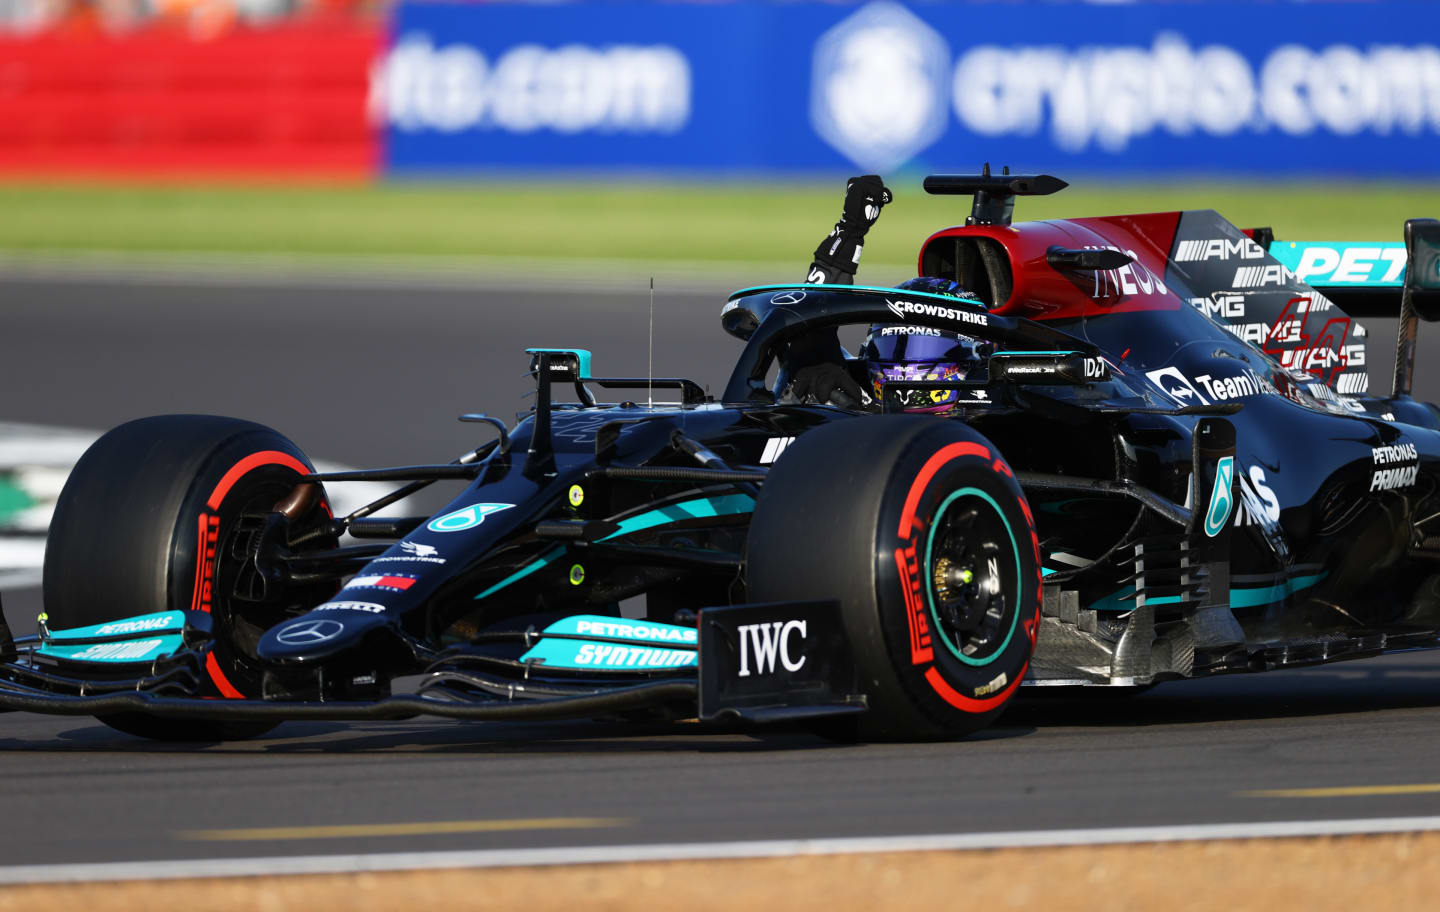 NORTHAMPTON, ENGLAND - JULY 16: Fastest qualifier Lewis Hamilton of Great Britain and Mercedes GP celebrates during qualifying ahead of the F1 Grand Prix of Great Britain at Silverstone on July 16, 2021 in Northampton, England. (Photo by Bryn Lennon - Formula 1/Formula 1 via Getty Images)